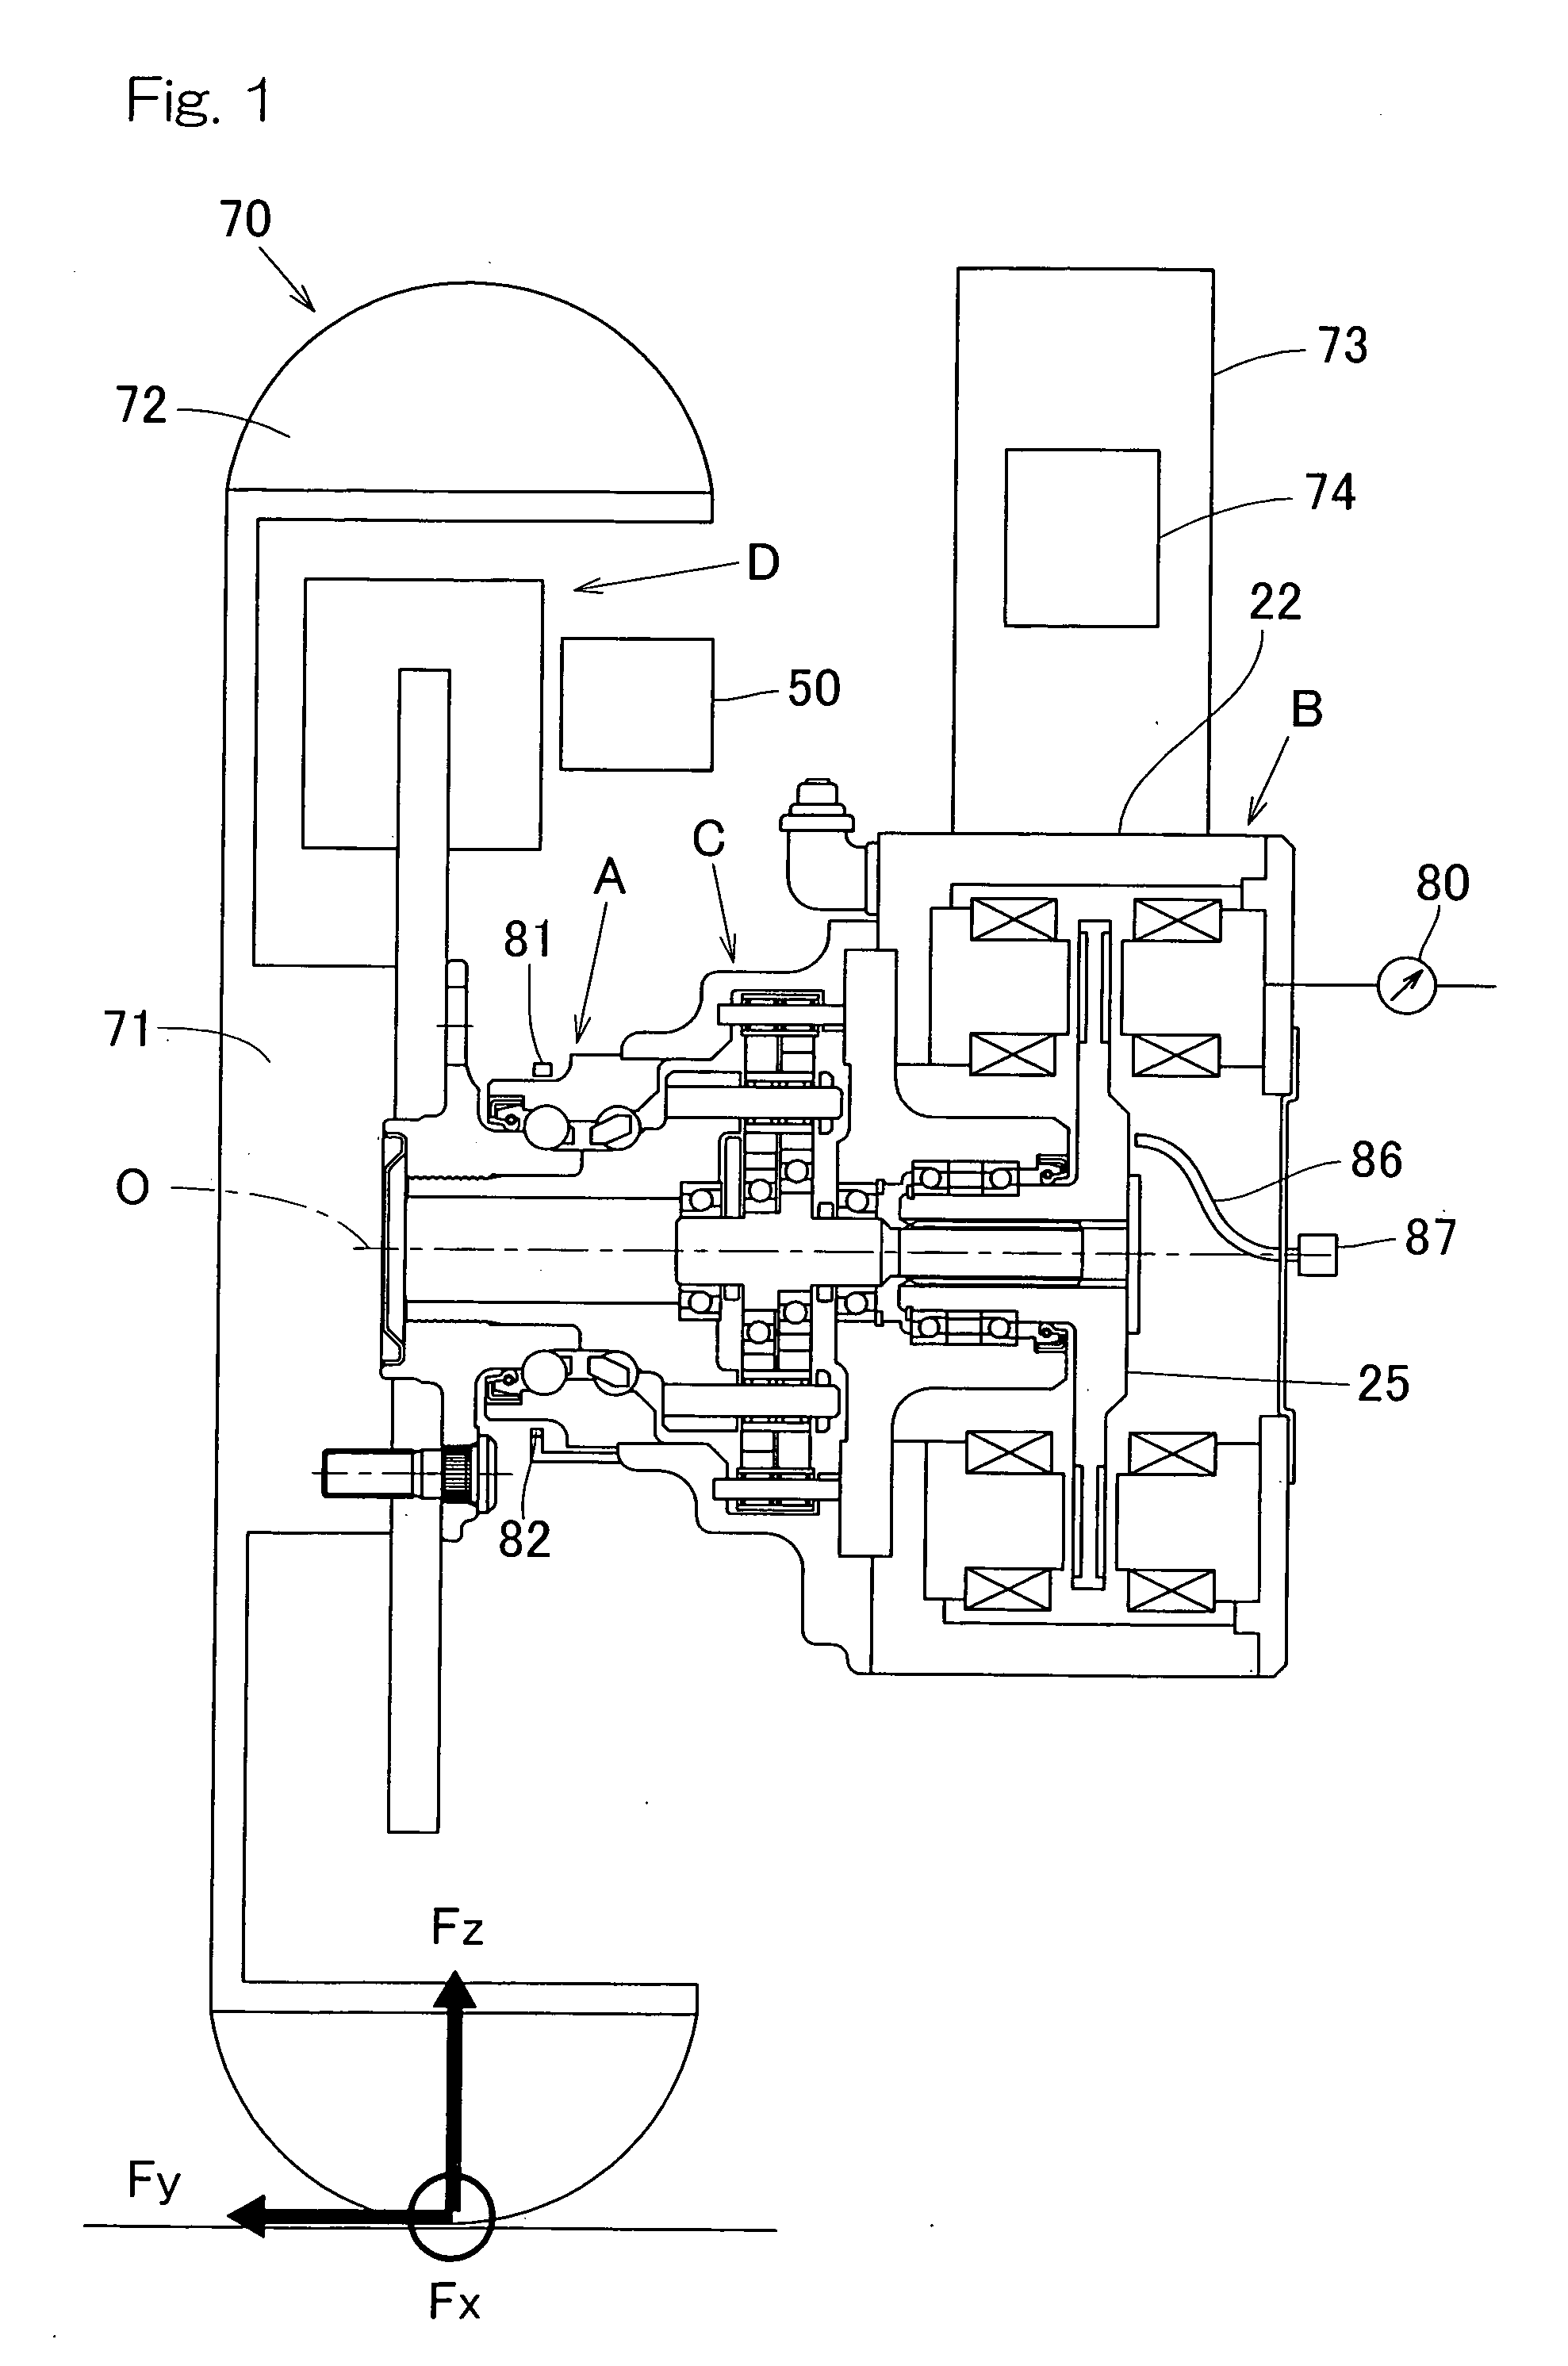 Sensor-equipped axle unit having a built-in motor of in-wheel type